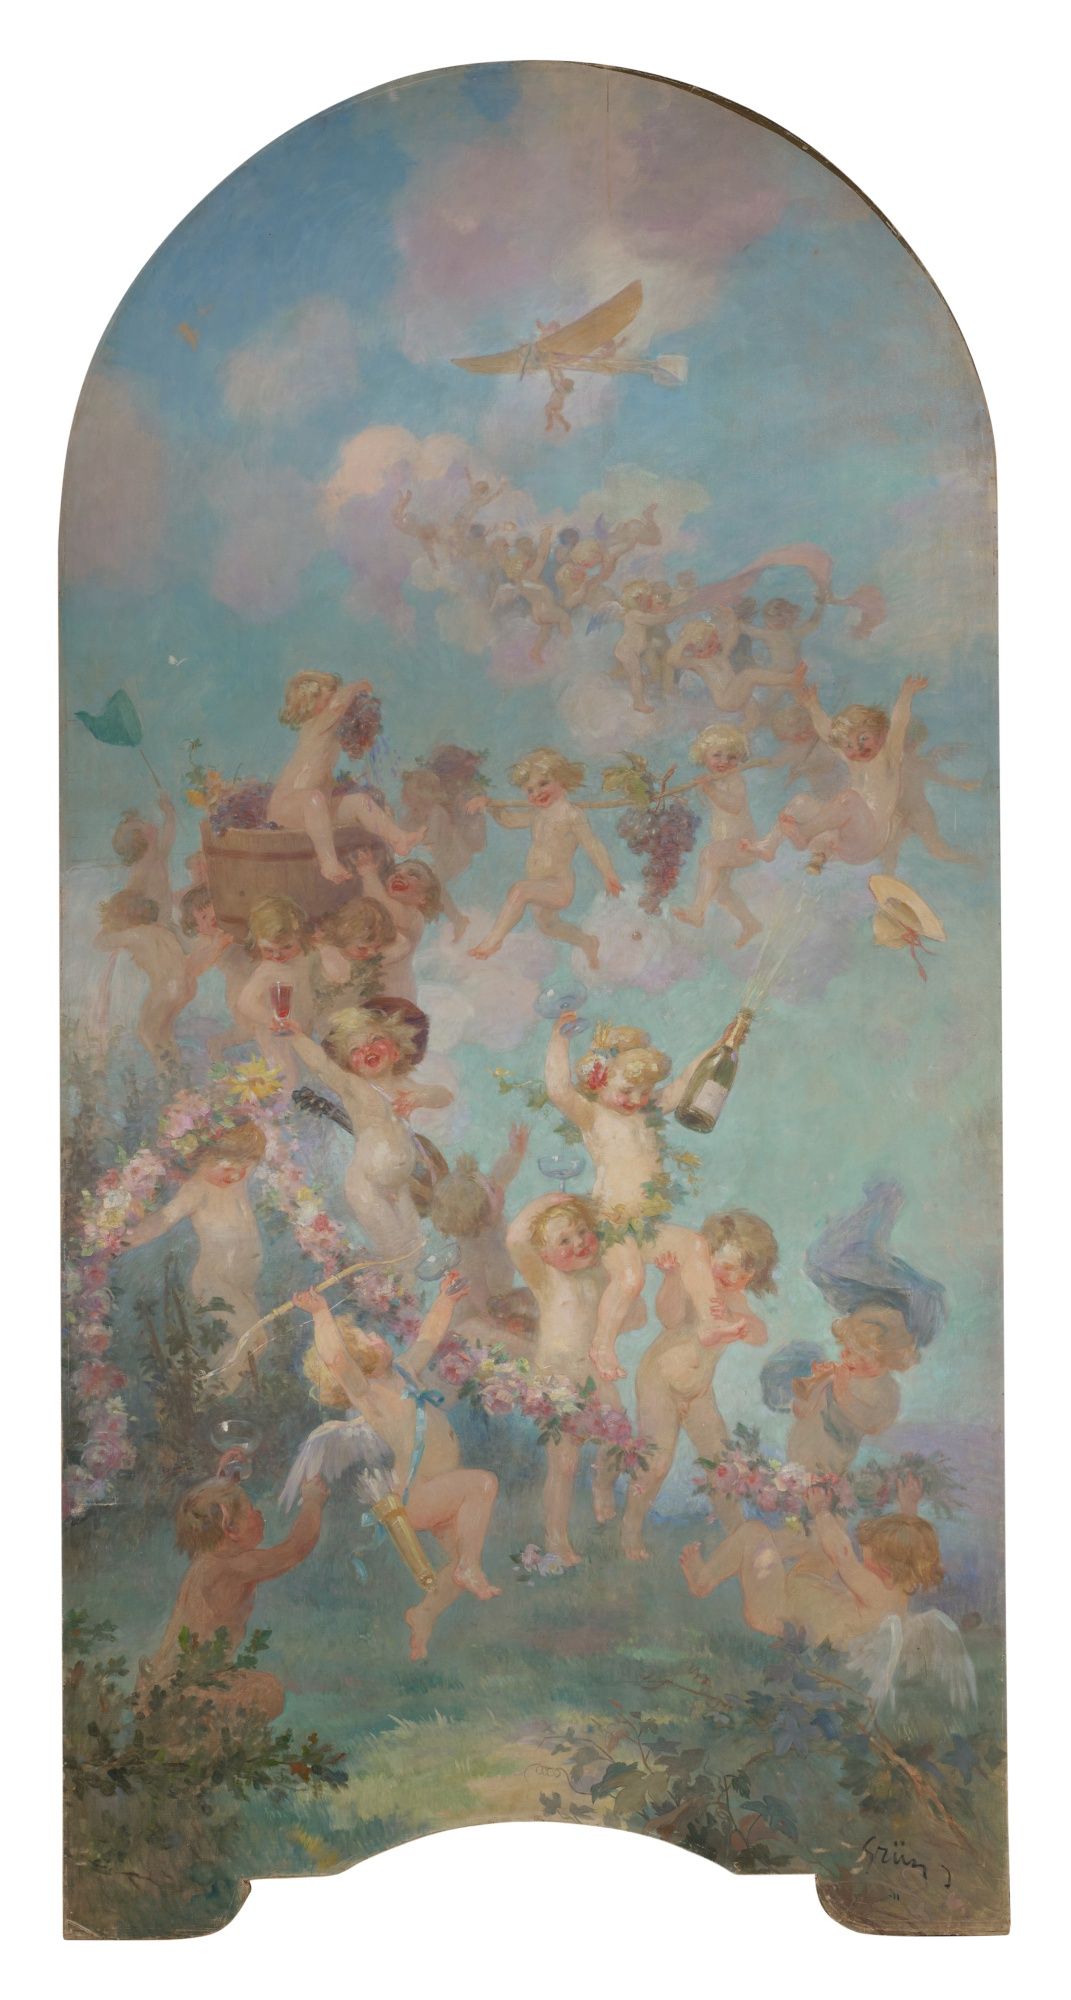 A painting of a group of cherubs playing with flowers and a bottle of champagne. - Angels